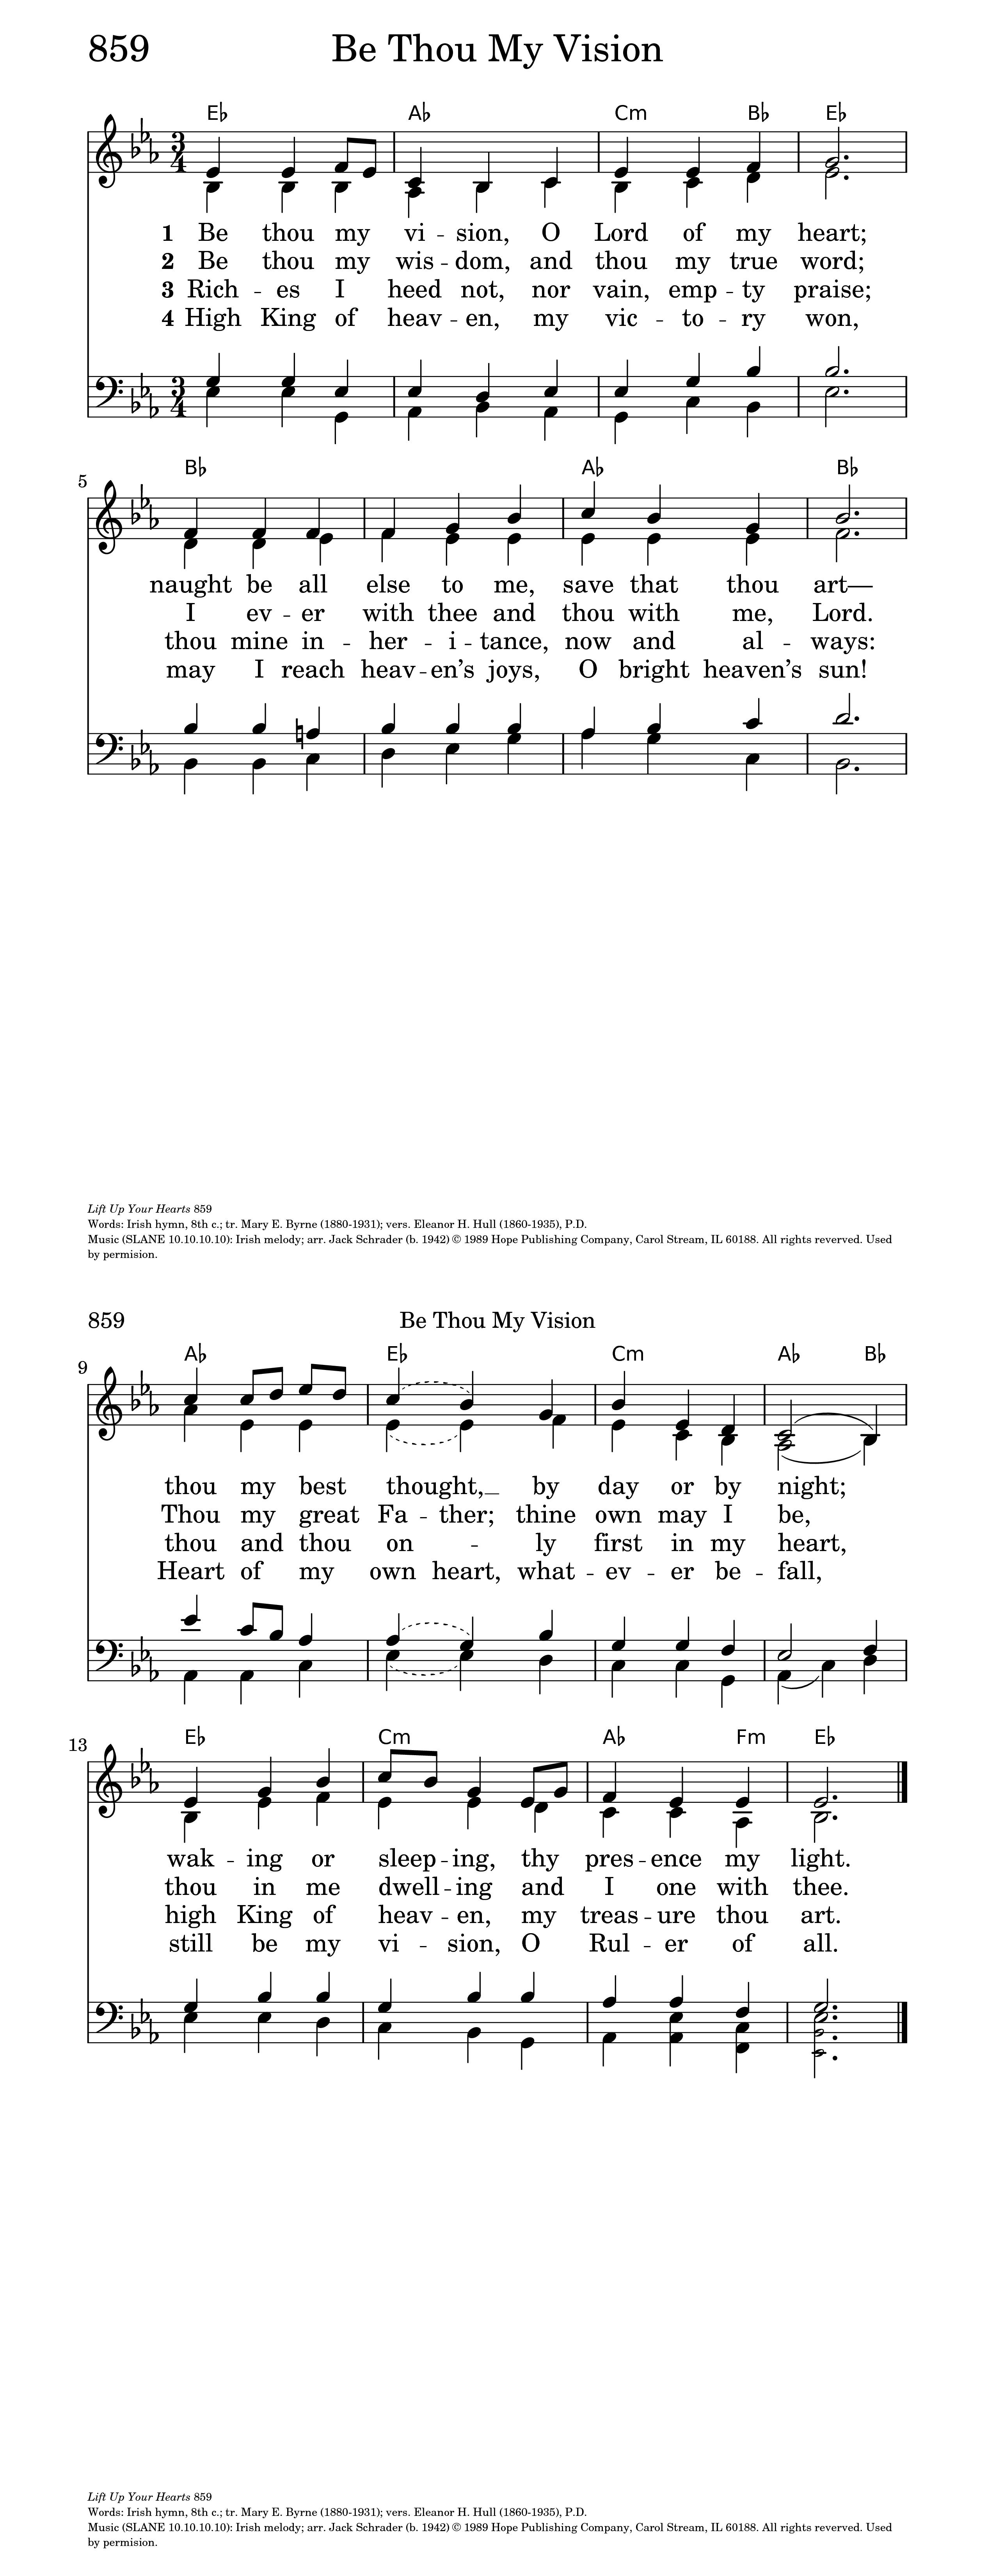 Why Tell Me Why - Song Lyrics and Music by Anita Meyer arranged by